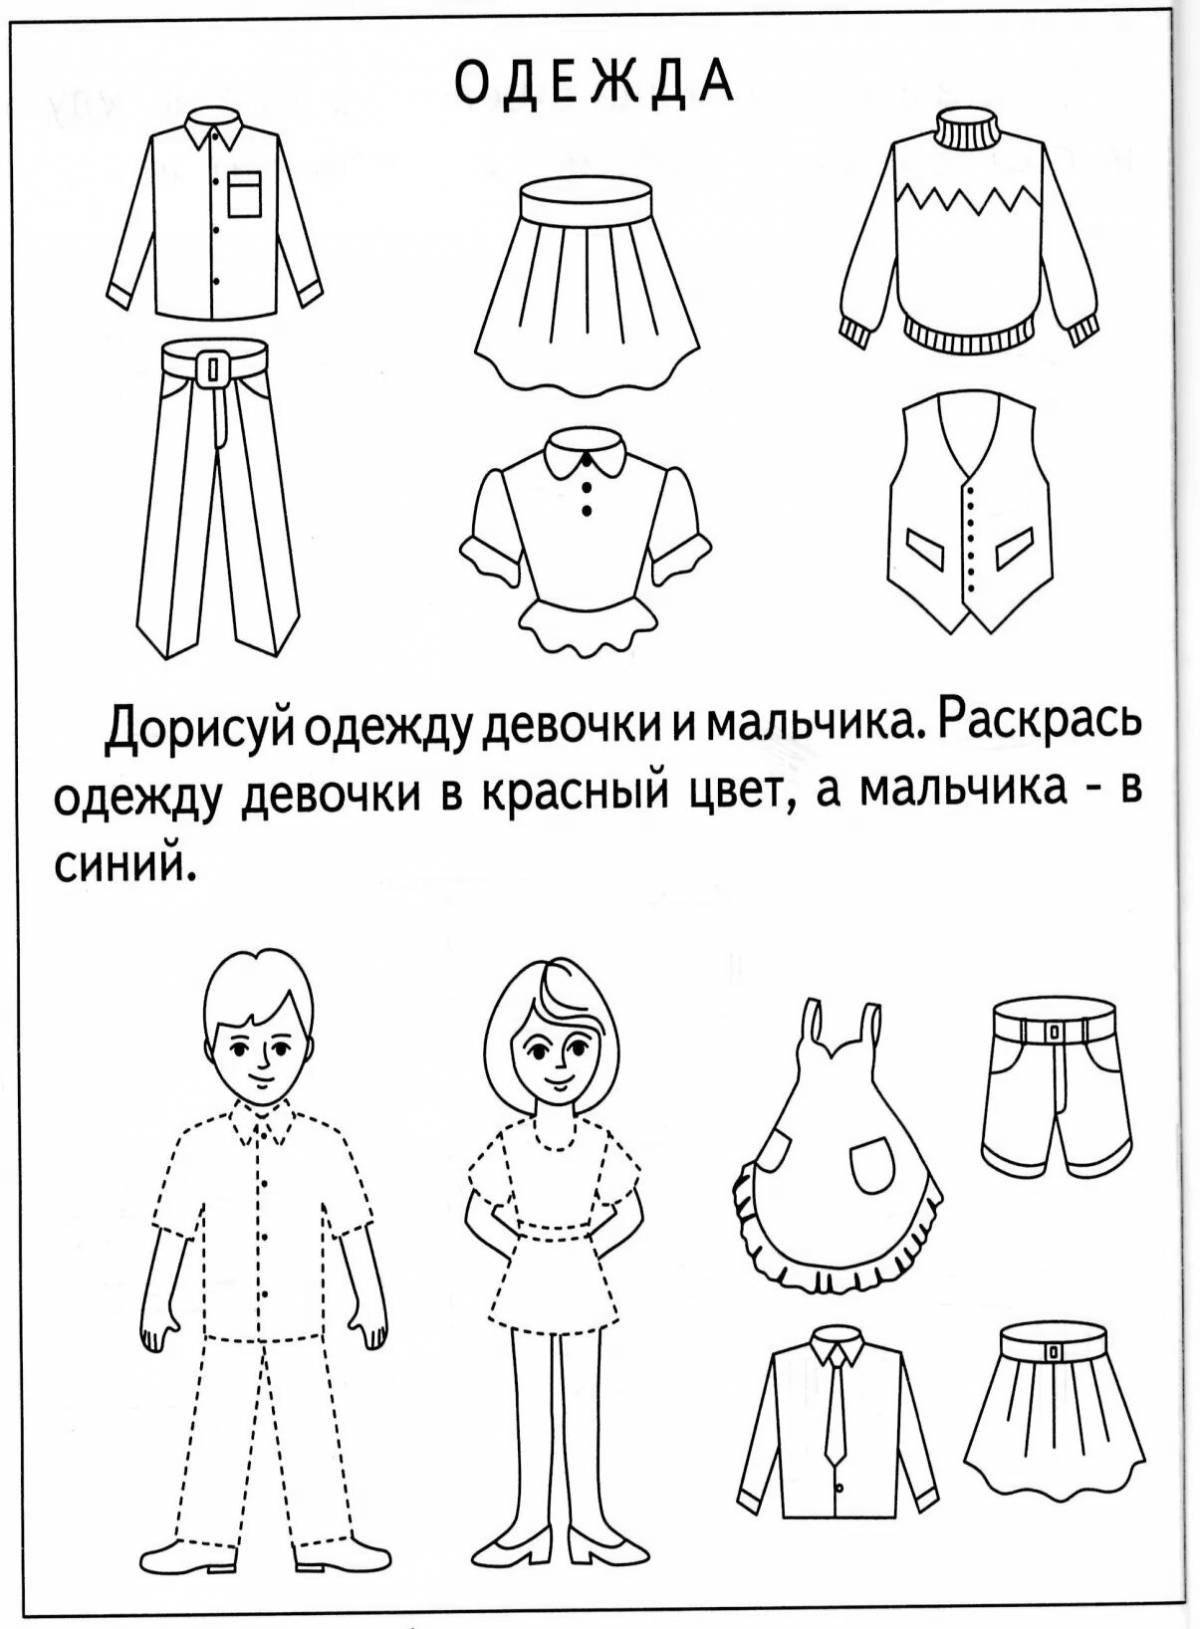 Types of clothing for children #3